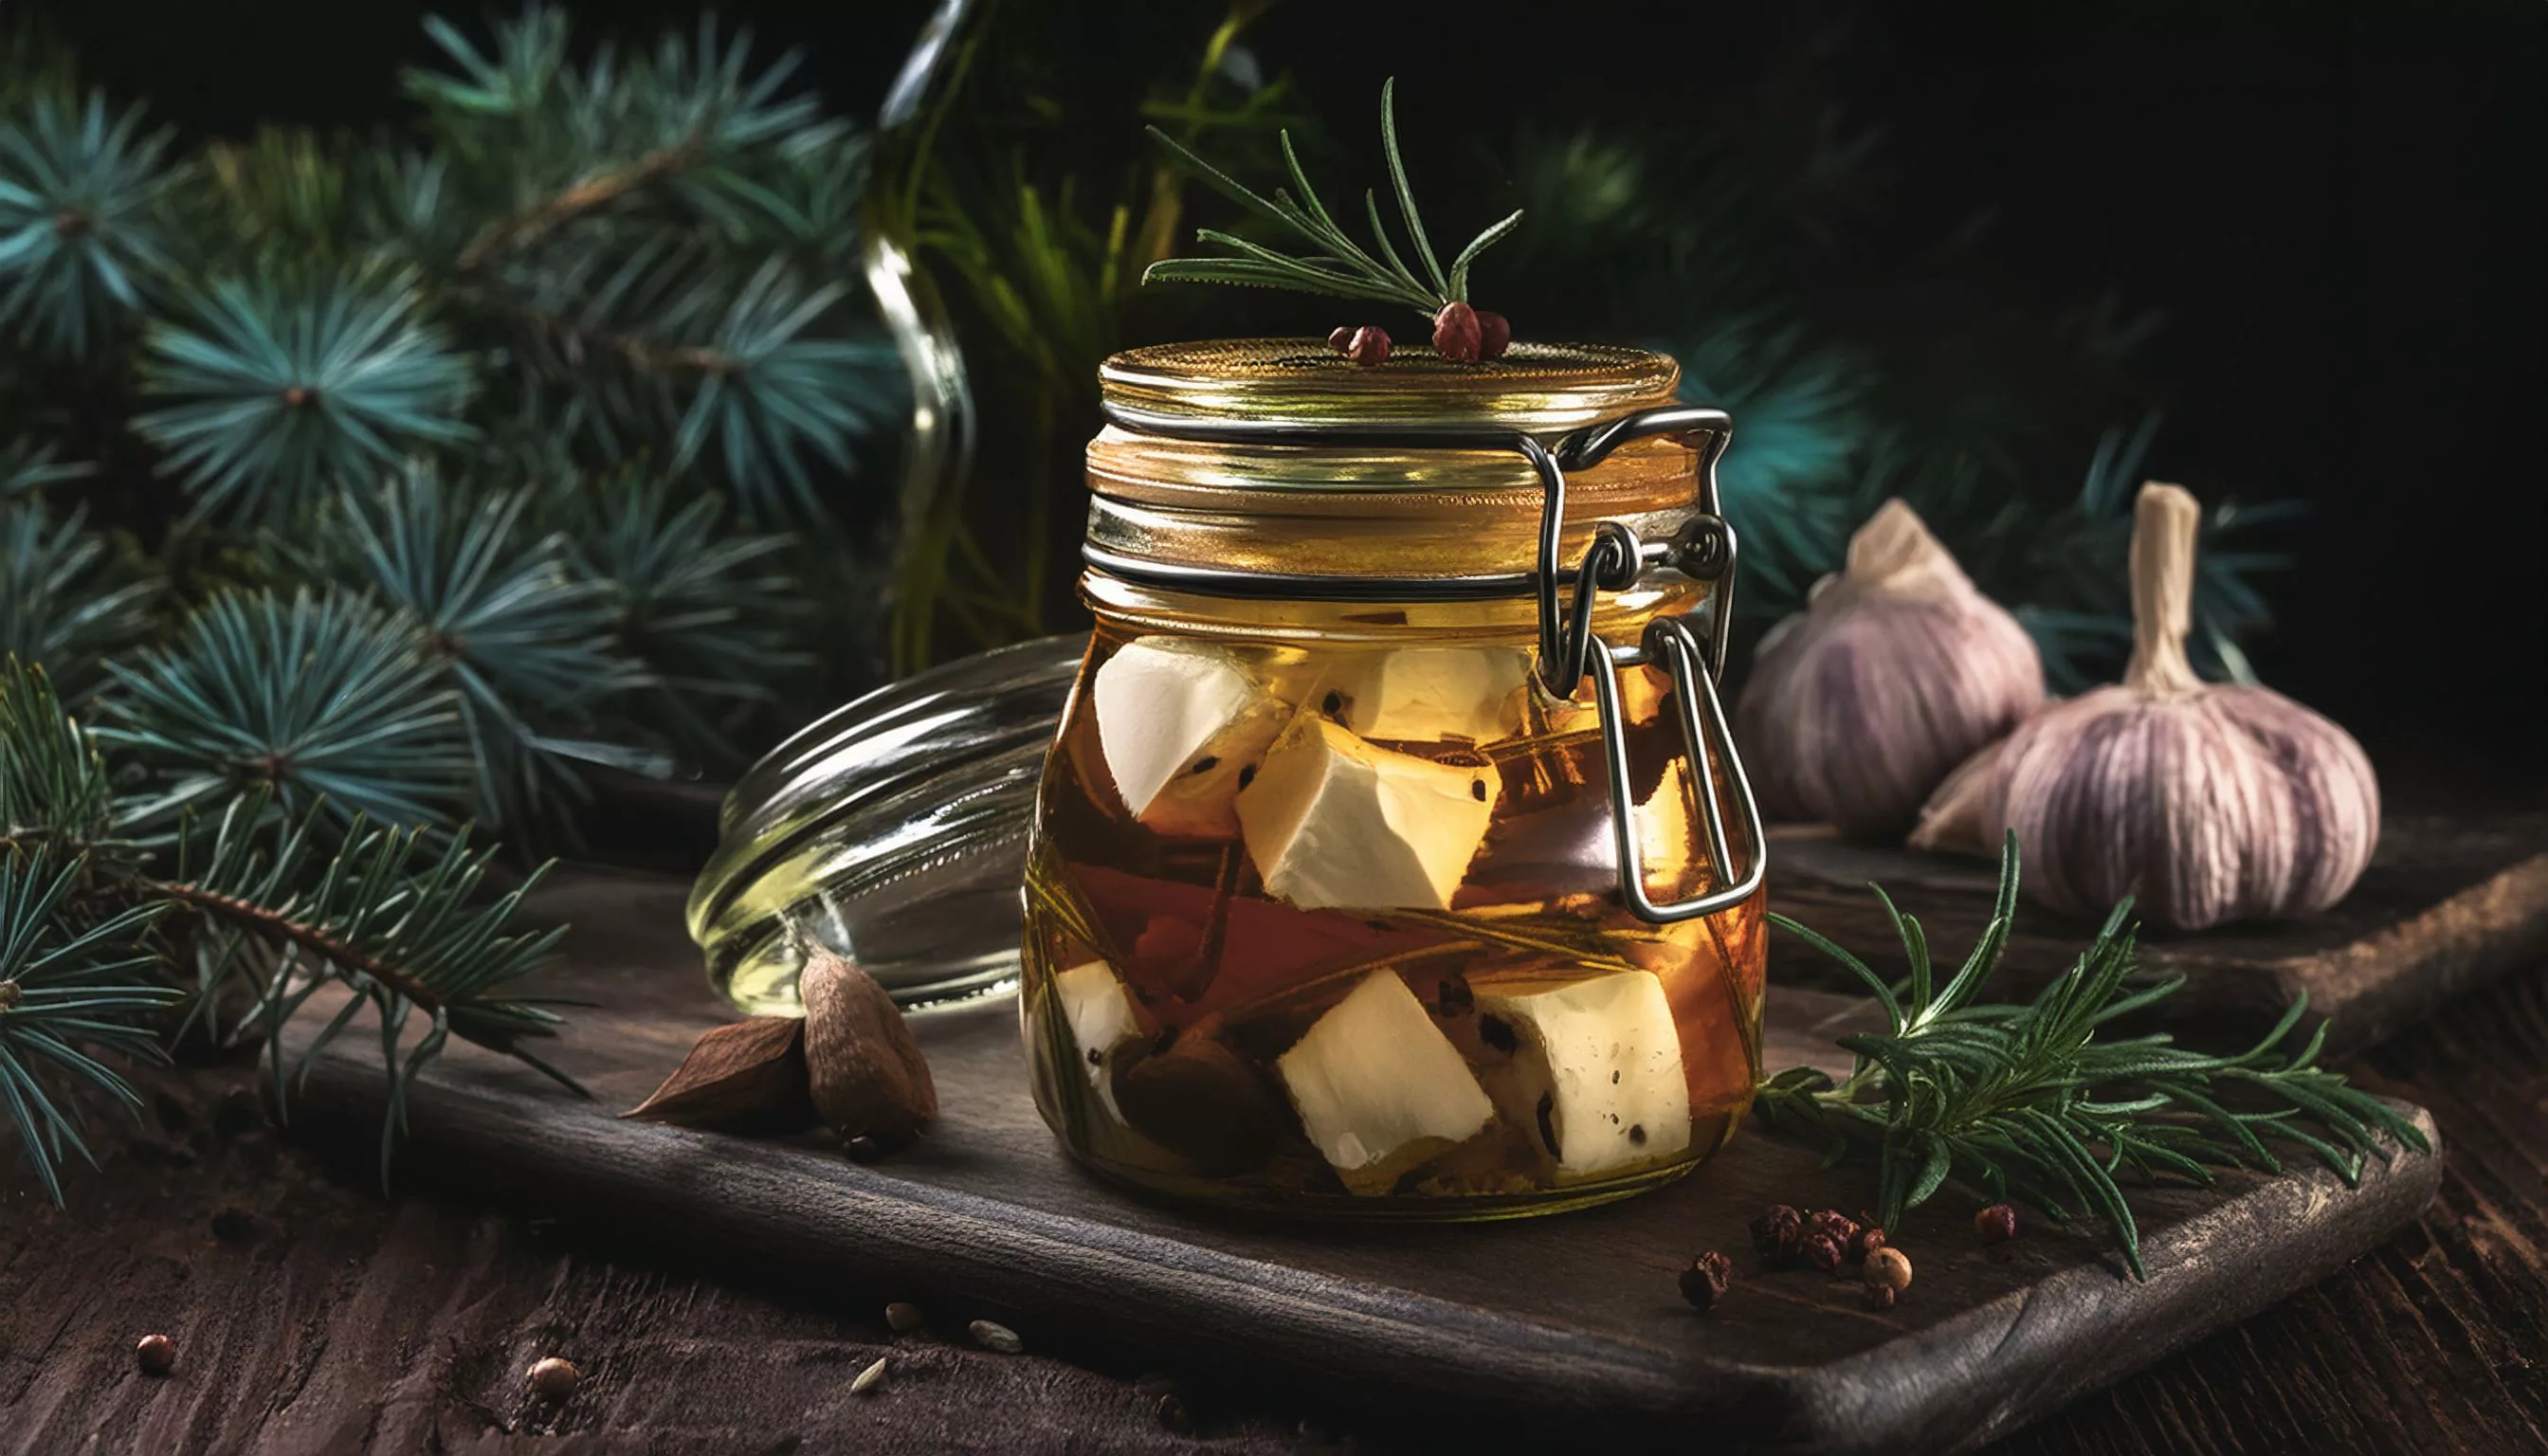 Firefly Pickled camembert in oil and glass 82860 a